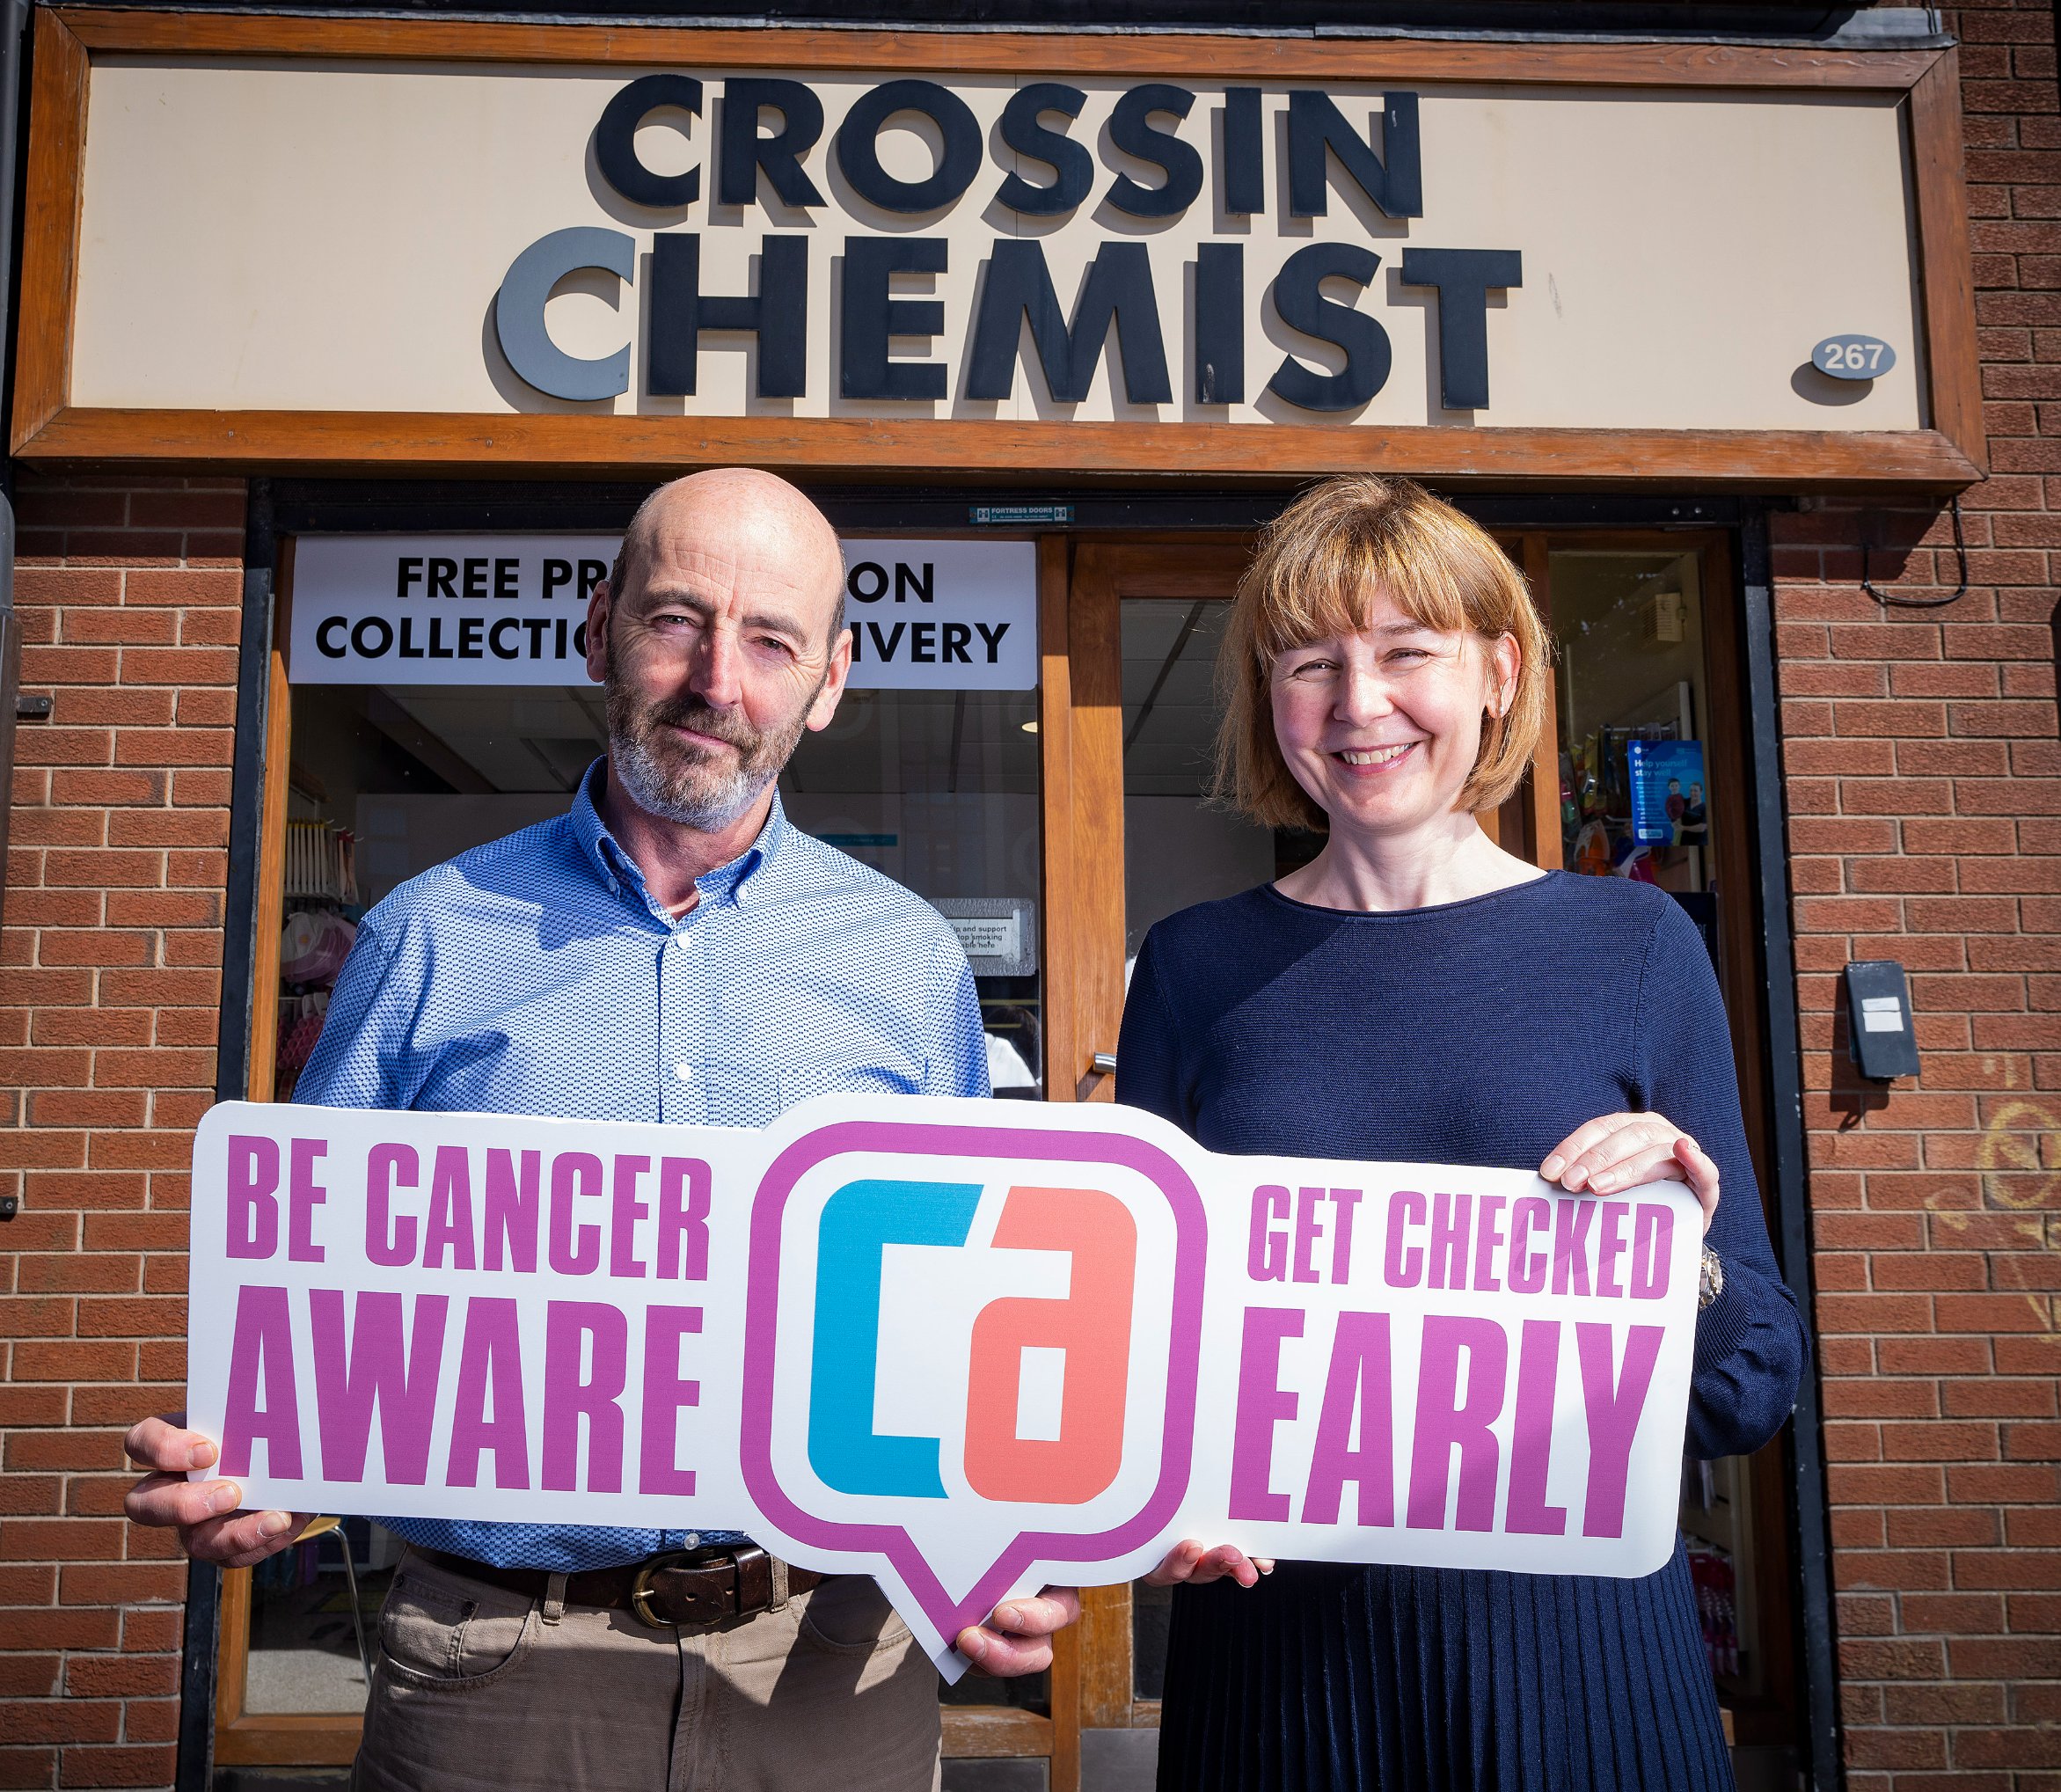 Living Well Cancer campaign launches in pharmacies